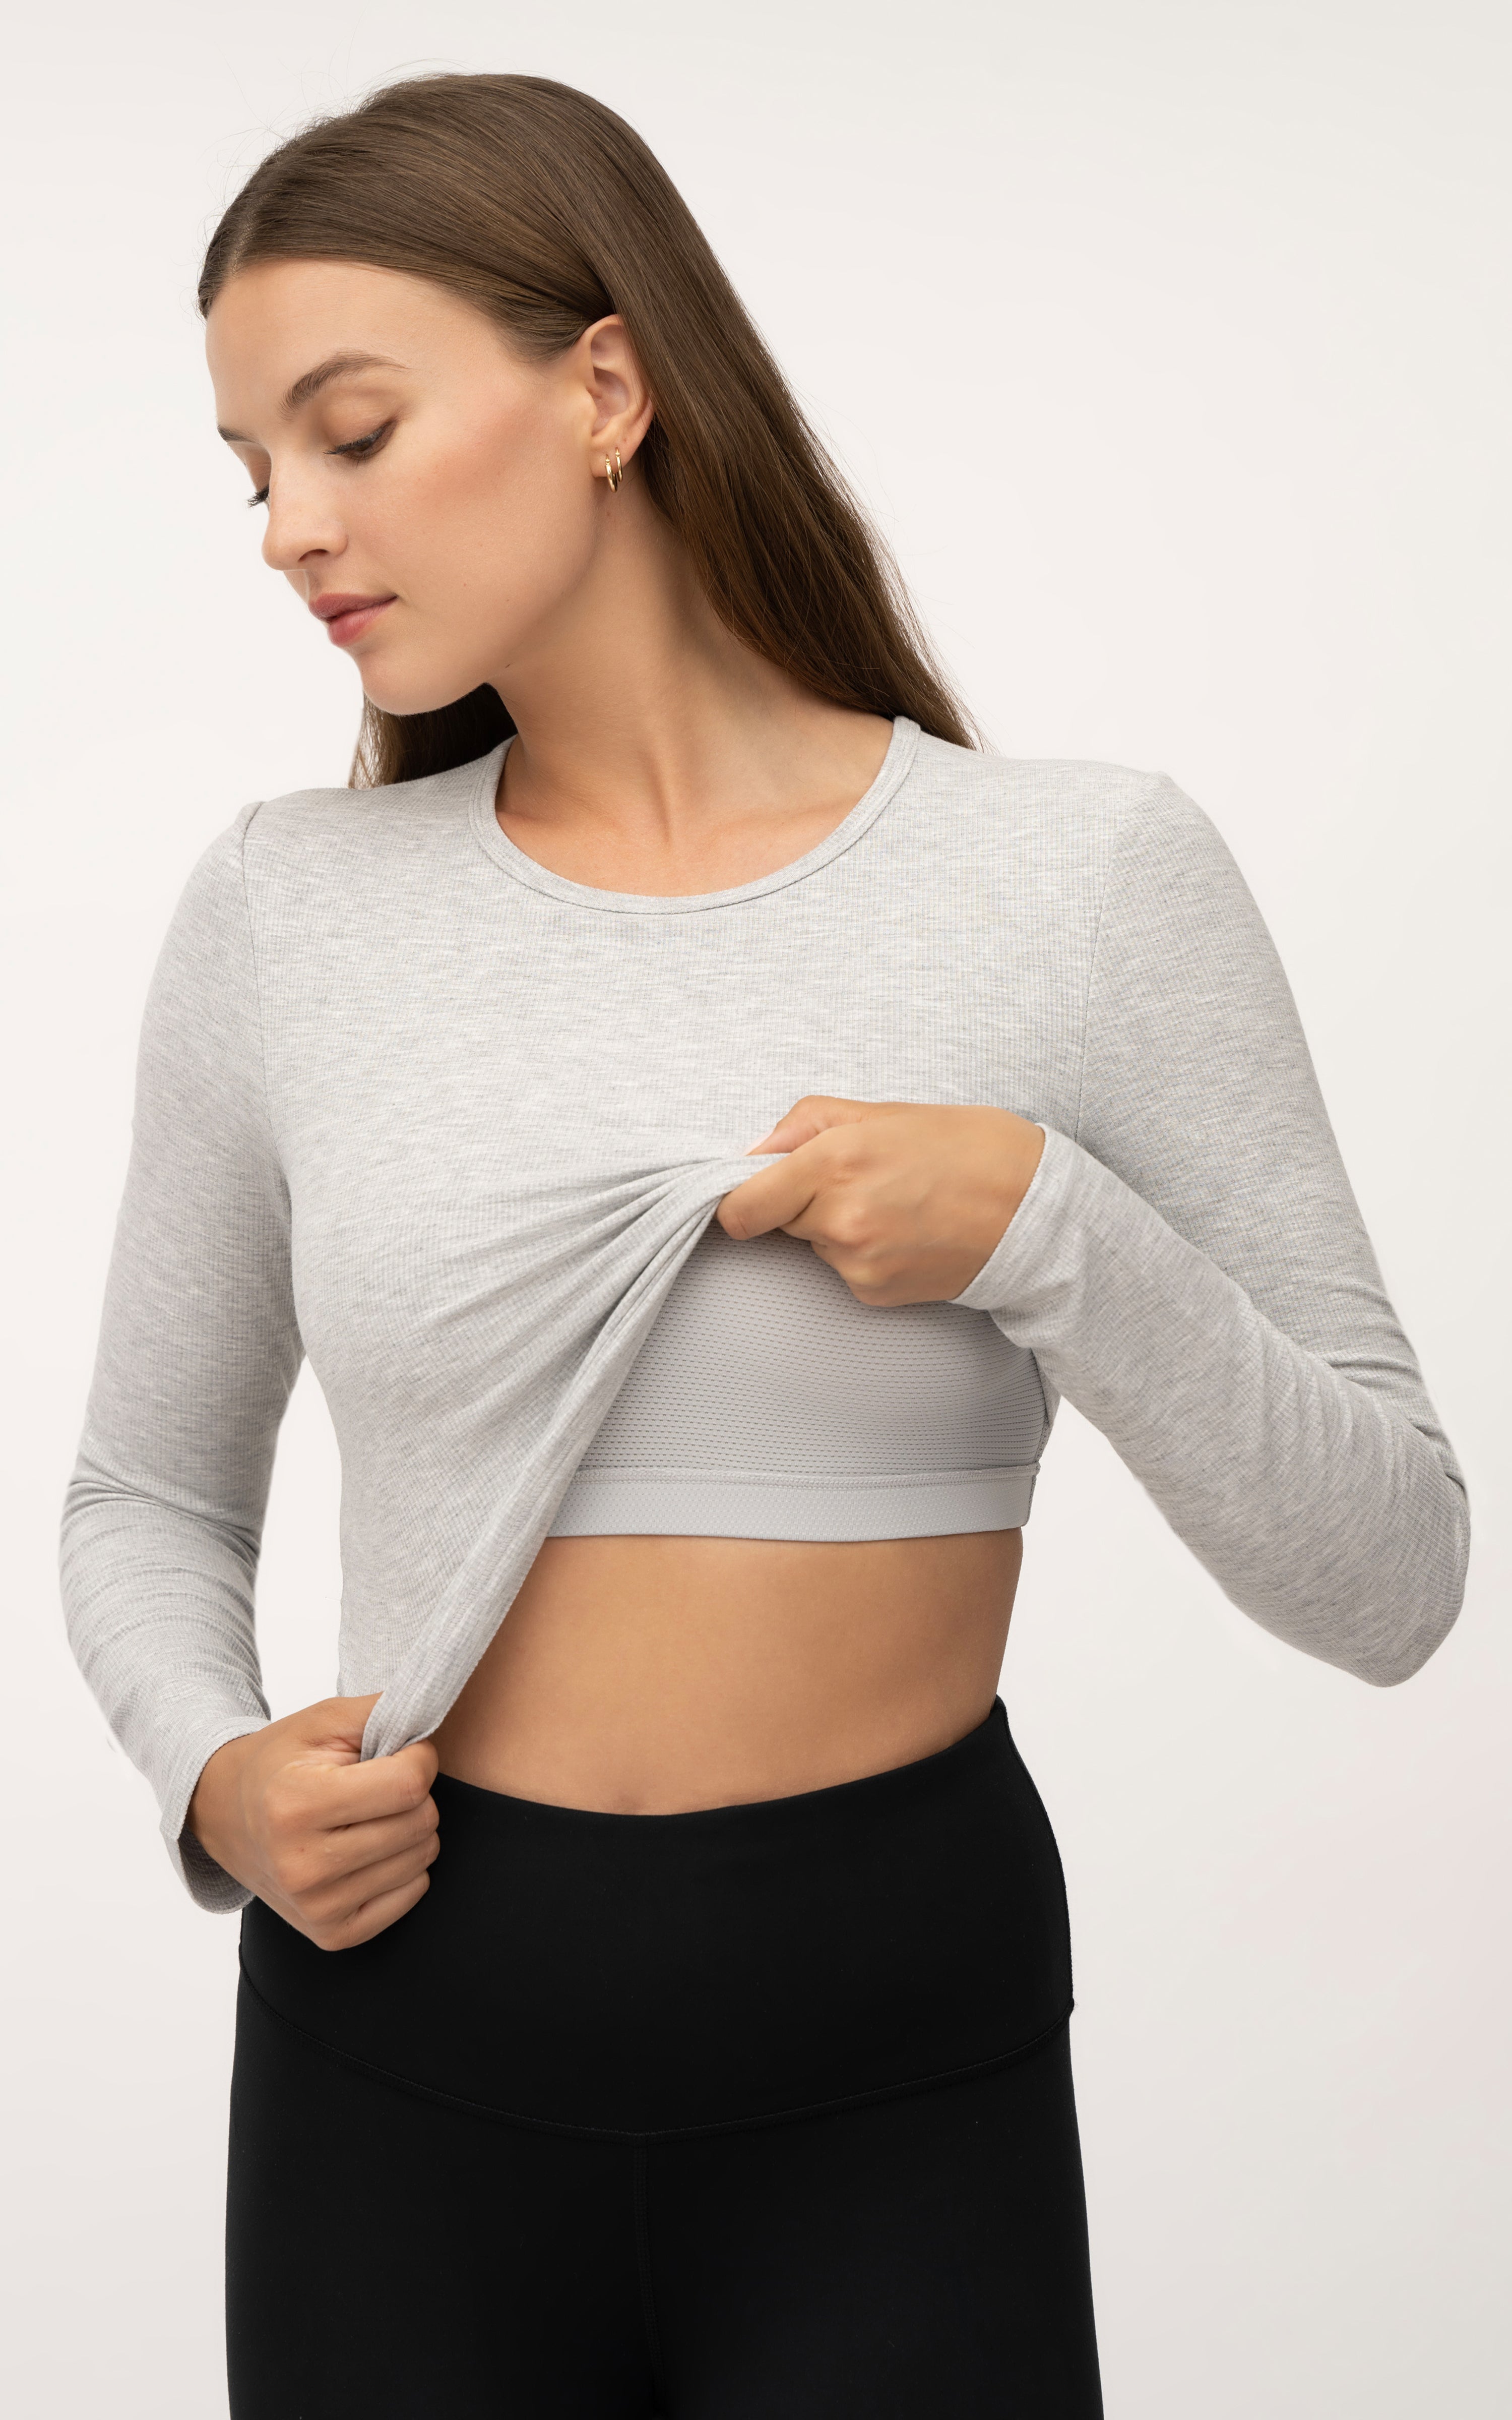 2 in 1 Built in Bra Tops. For ease and convenience, simplifying your wardrobe while ensuring comfort and support. Shop Now.